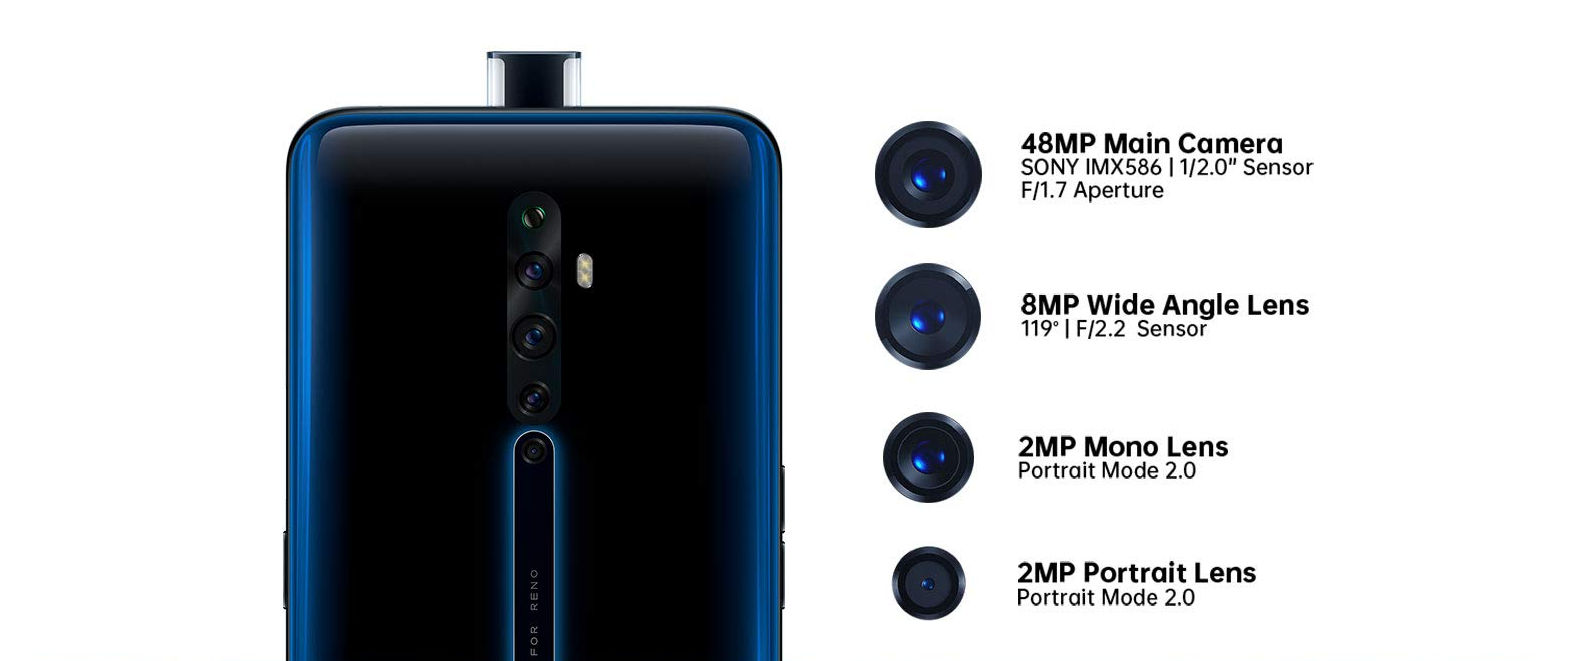 https://assets.mspimages.in/gear/wp-content/uploads/2019/09/OPPO-Reno2-Z-Quad-Camera-Details.png